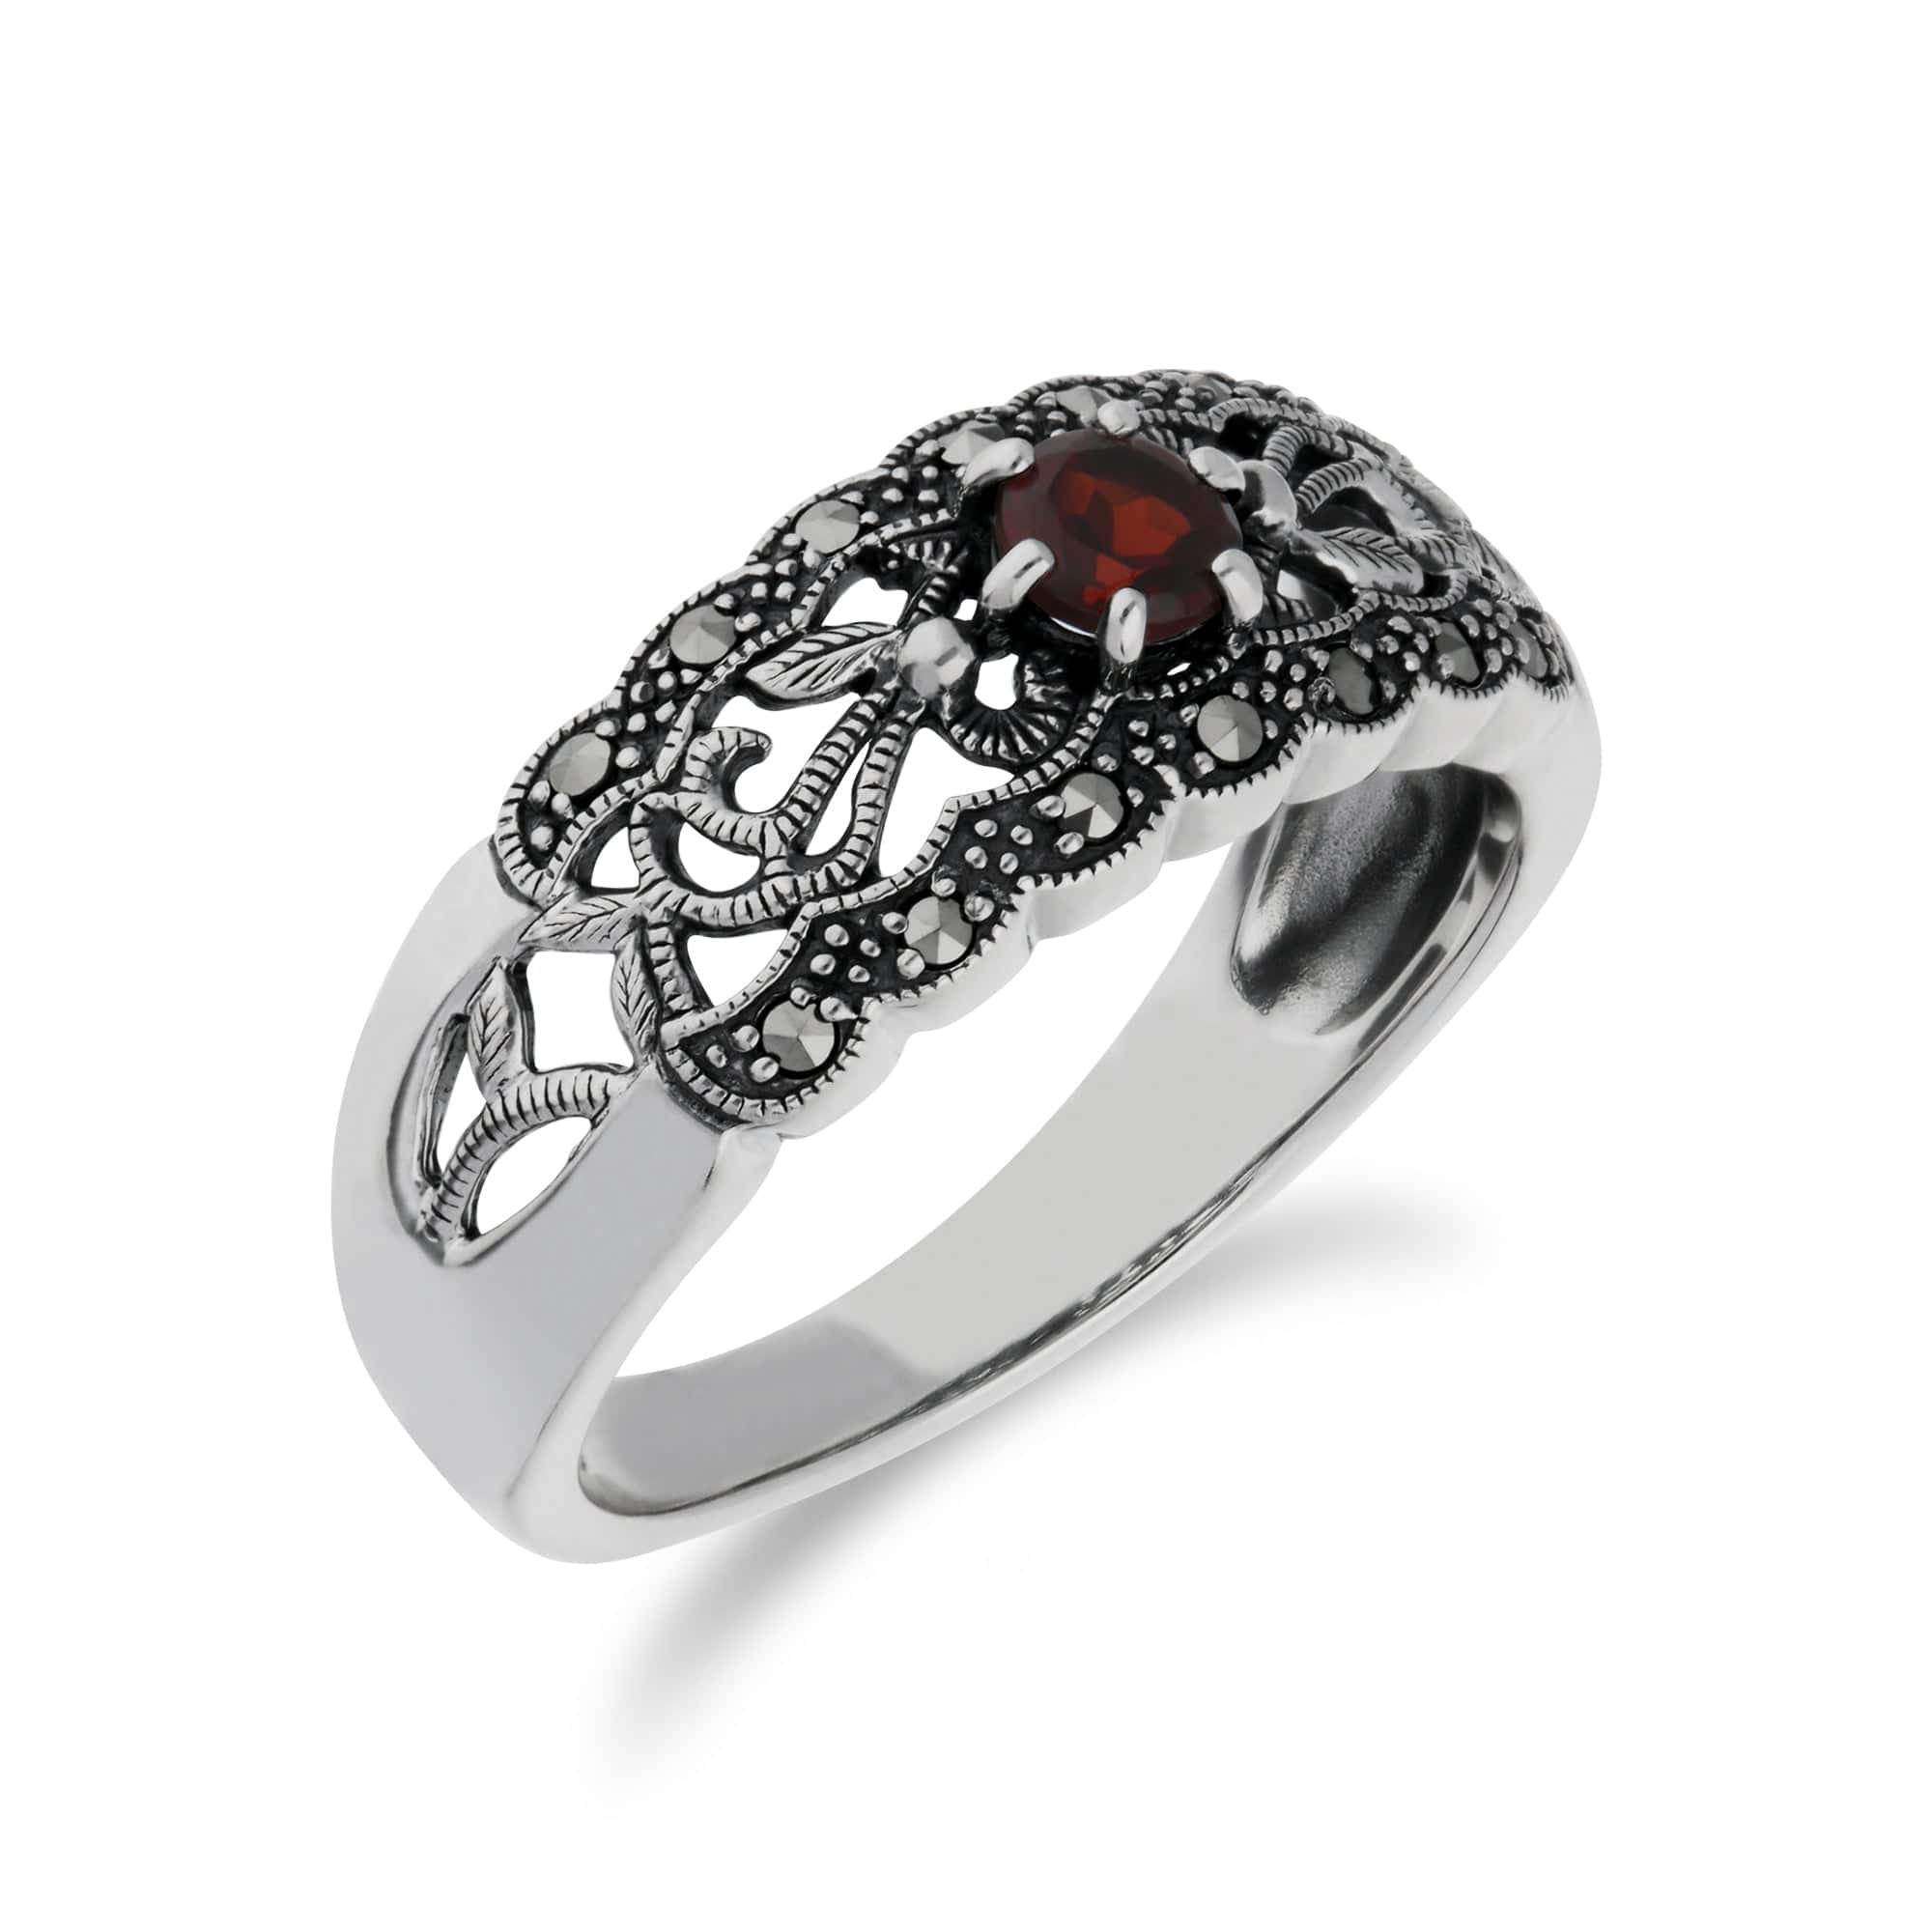 214R597707925 Art Nouveau Style Round Garnet & Marcasite Floral Band Ring in 925 Sterling Silver 3